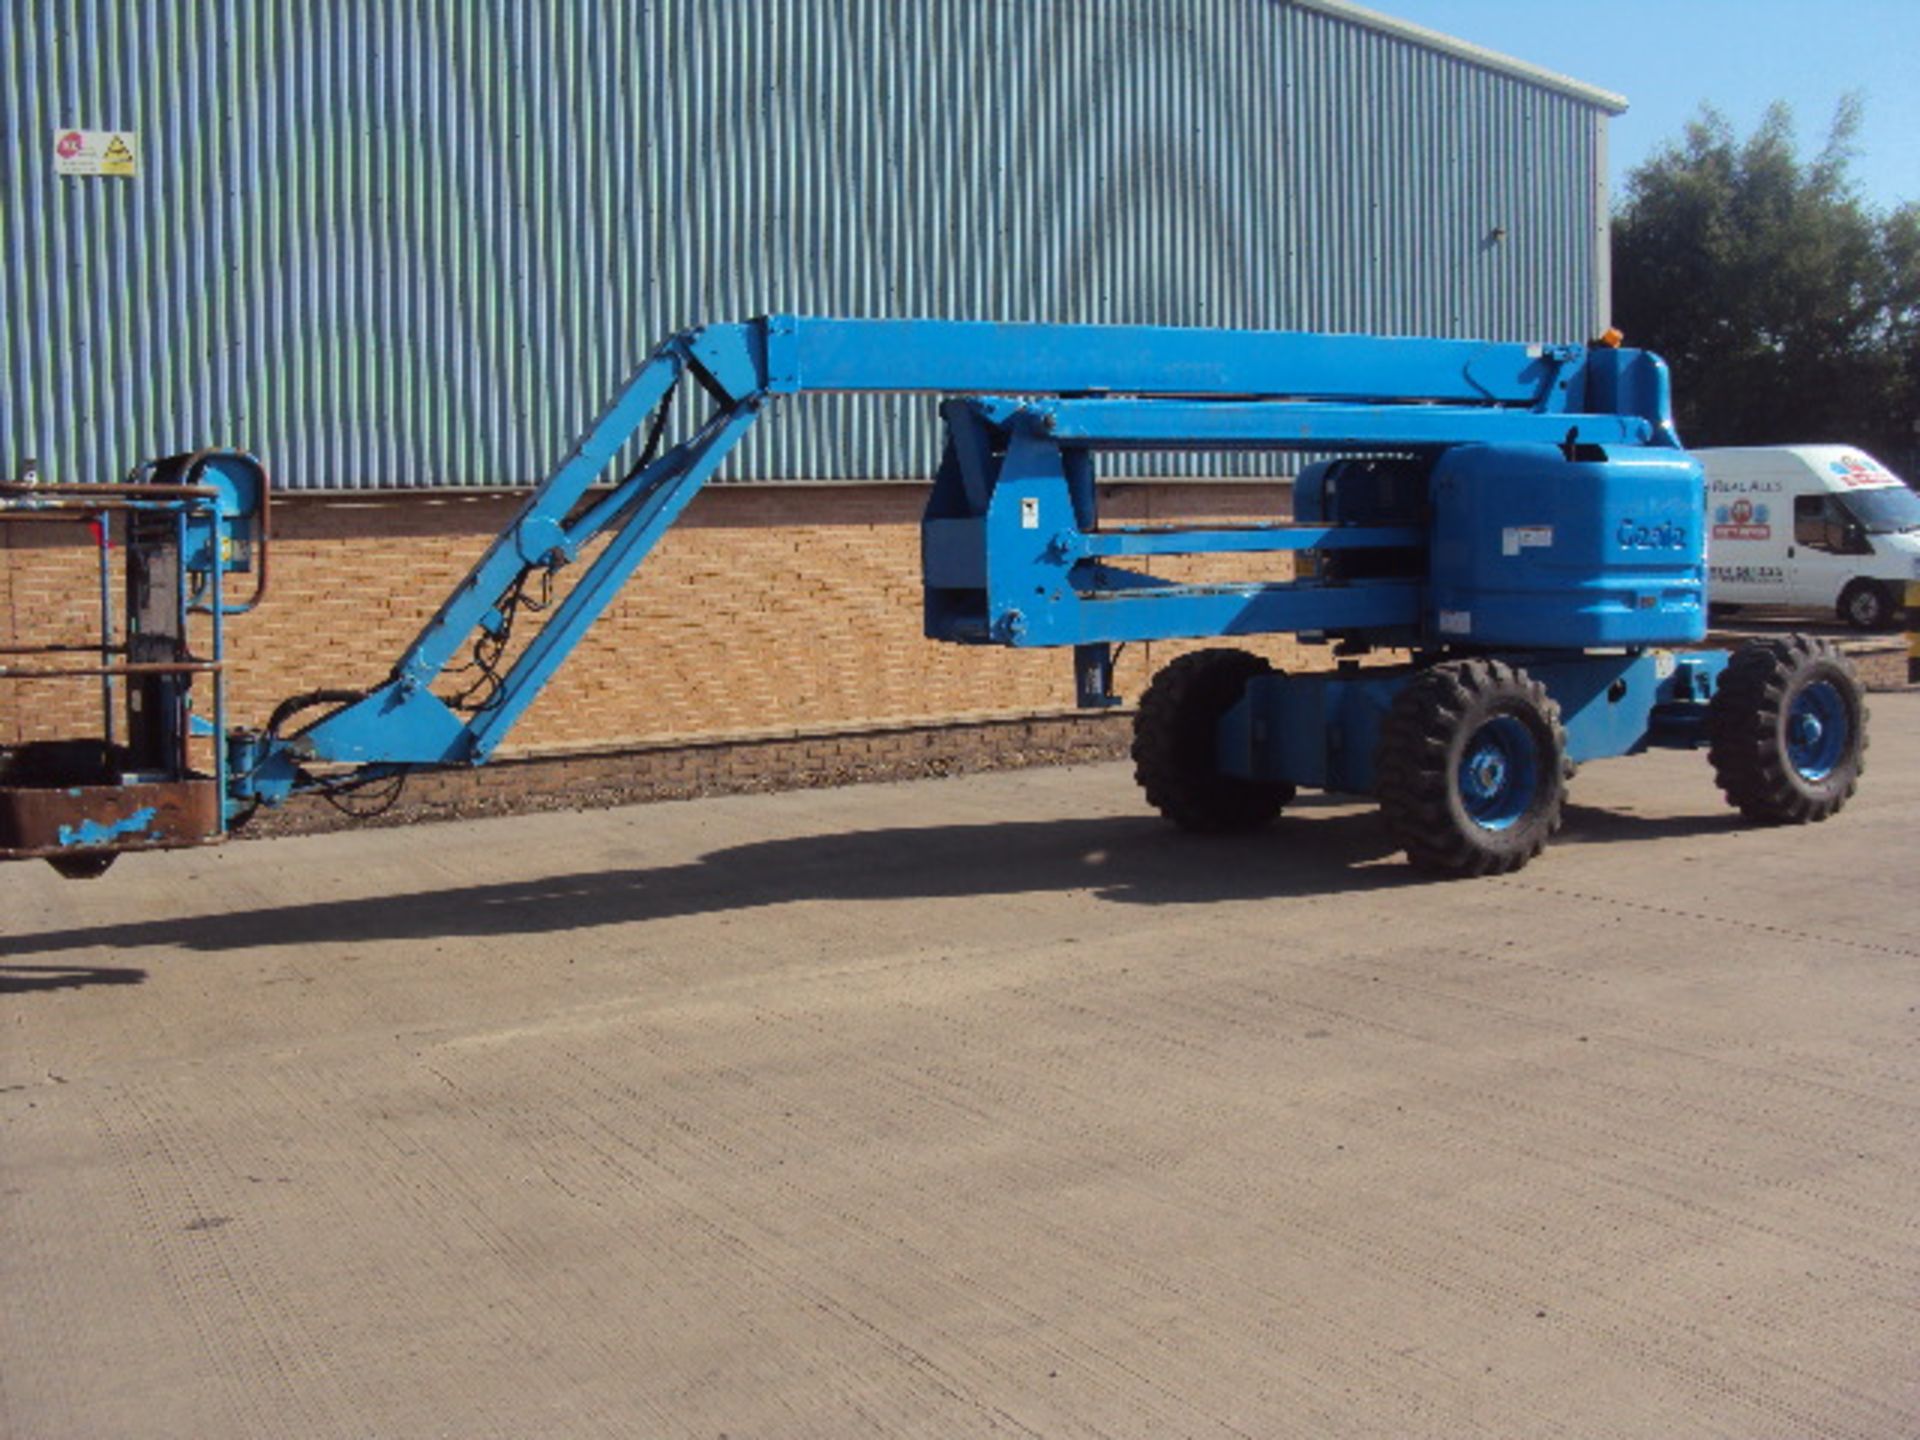 1999 GENIE Z60-34 60' 2wd articulated boom lift S/n: Z60-1983) (4991 recorded hours) (RDL)